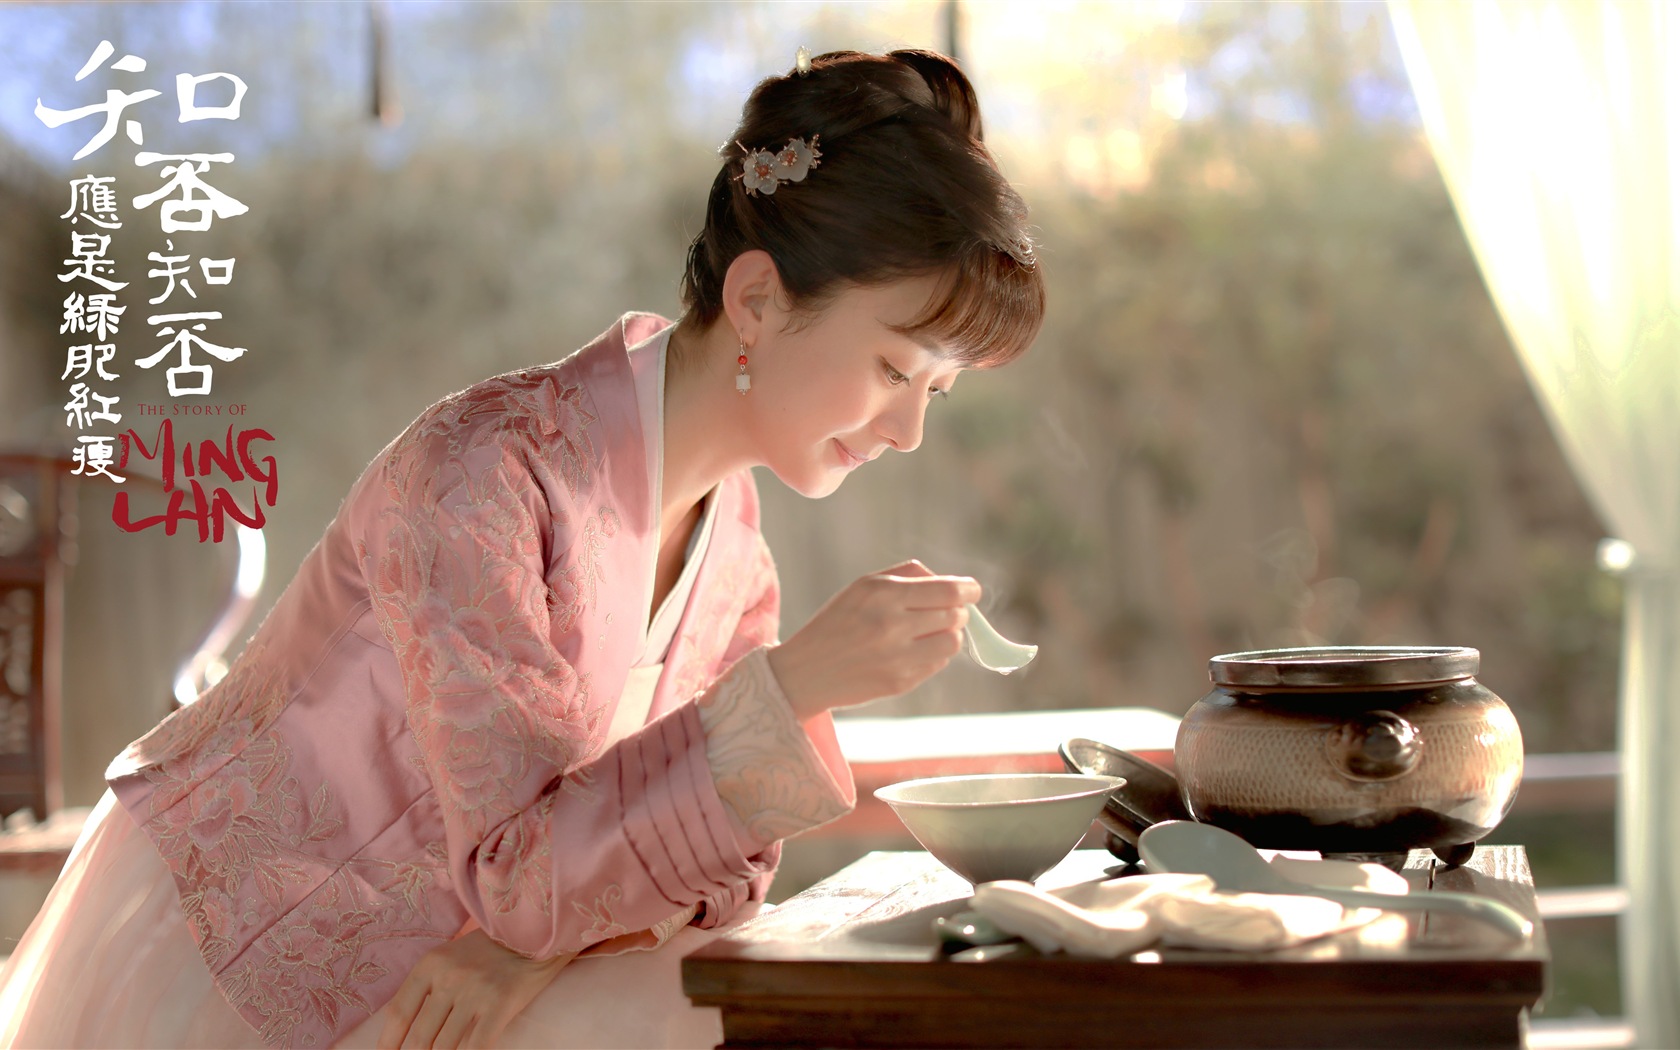 The Story Of MingLan, TV series HD wallpapers #29 - 1680x1050